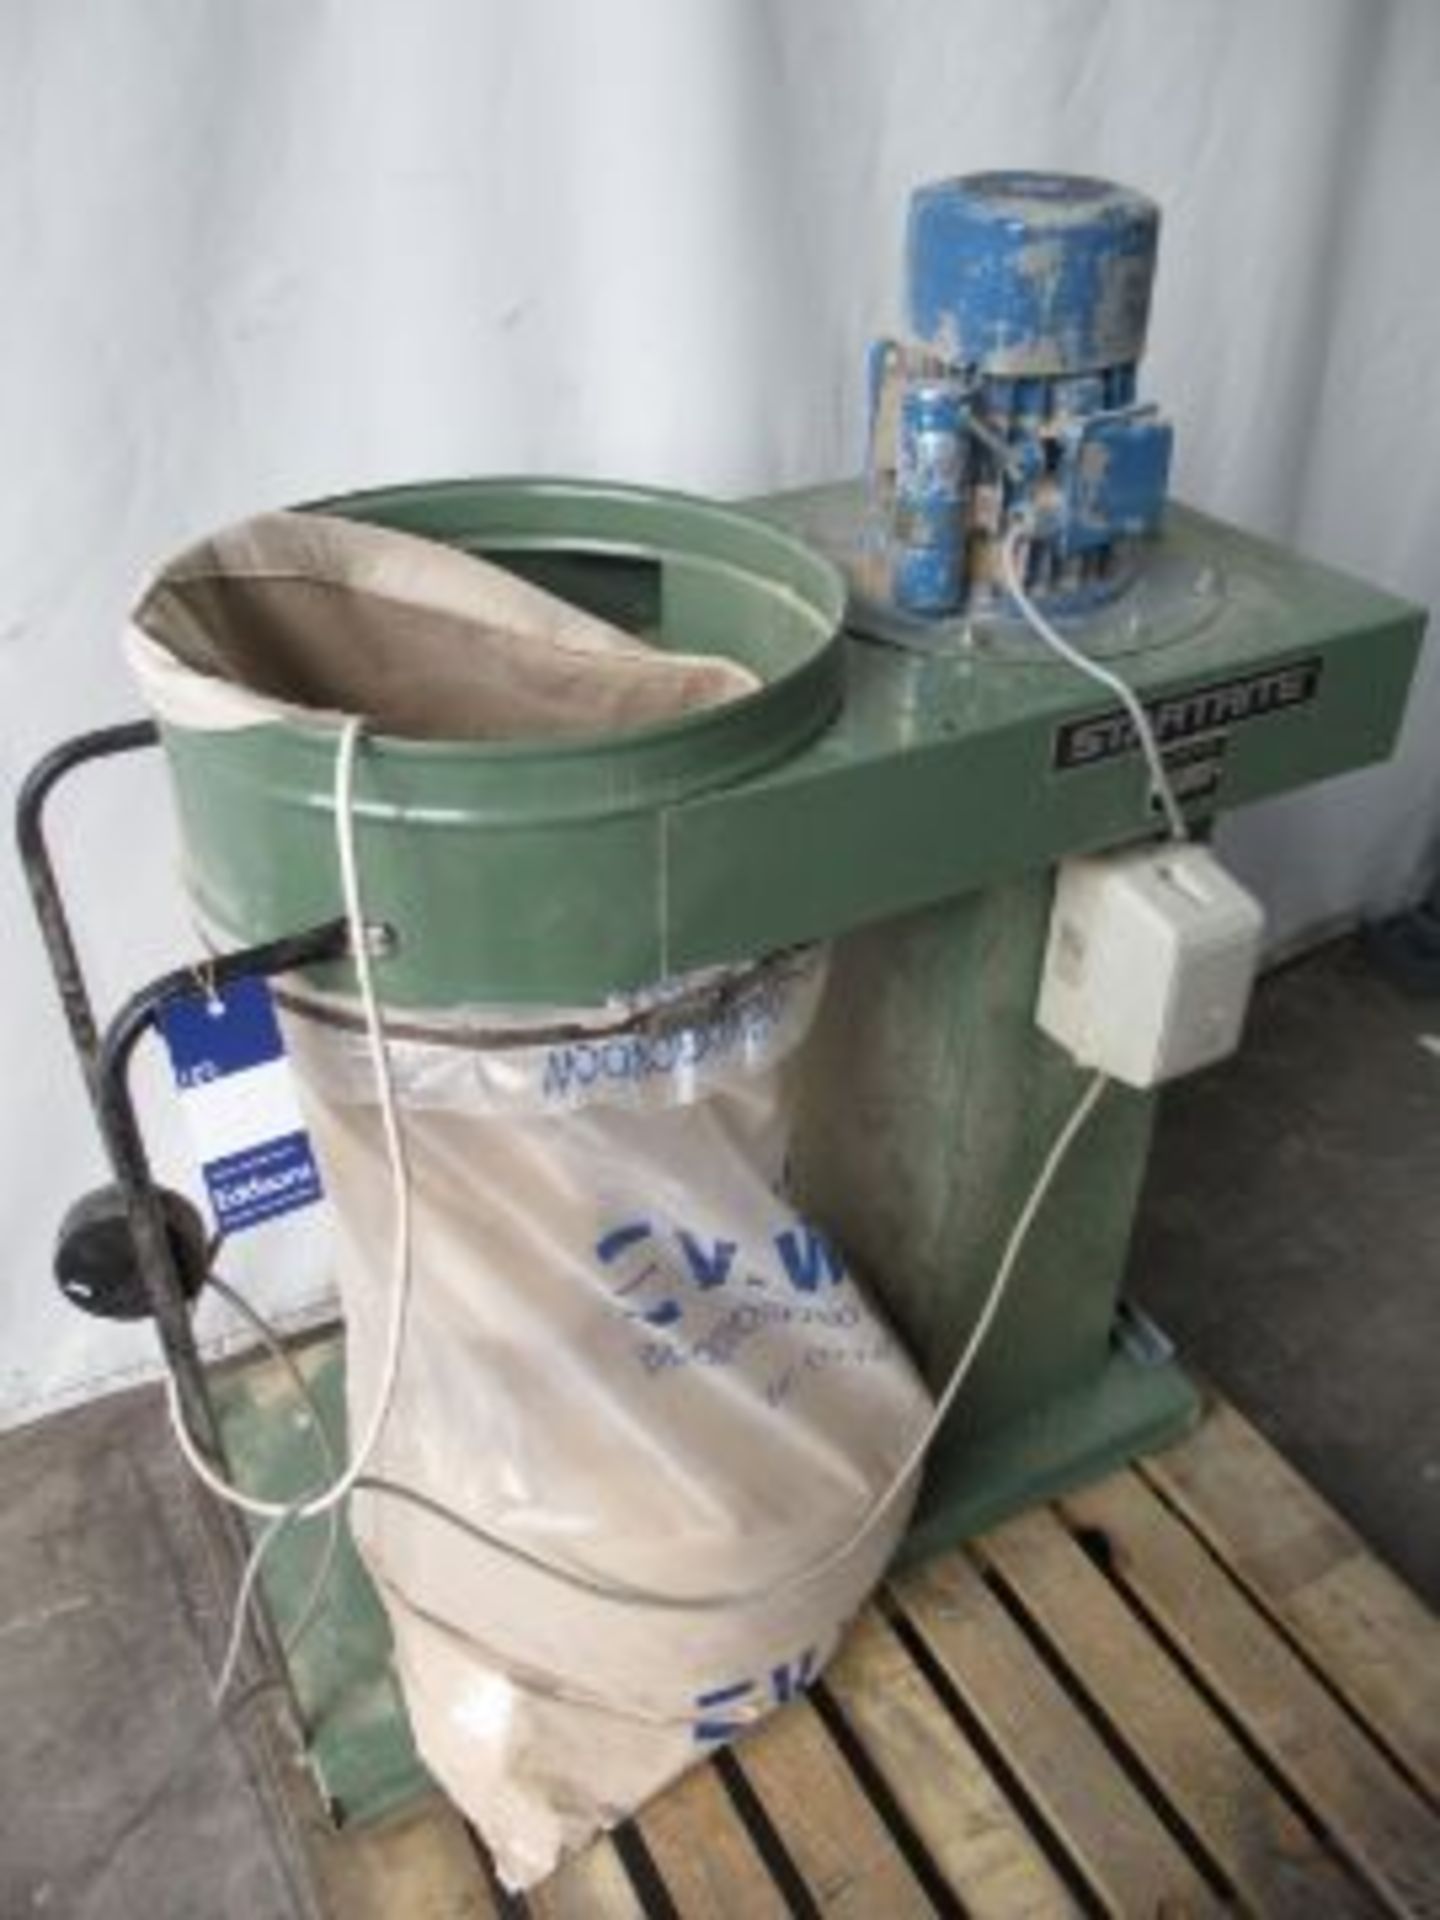 Robland single bag dust extraction unit - Image 5 of 5